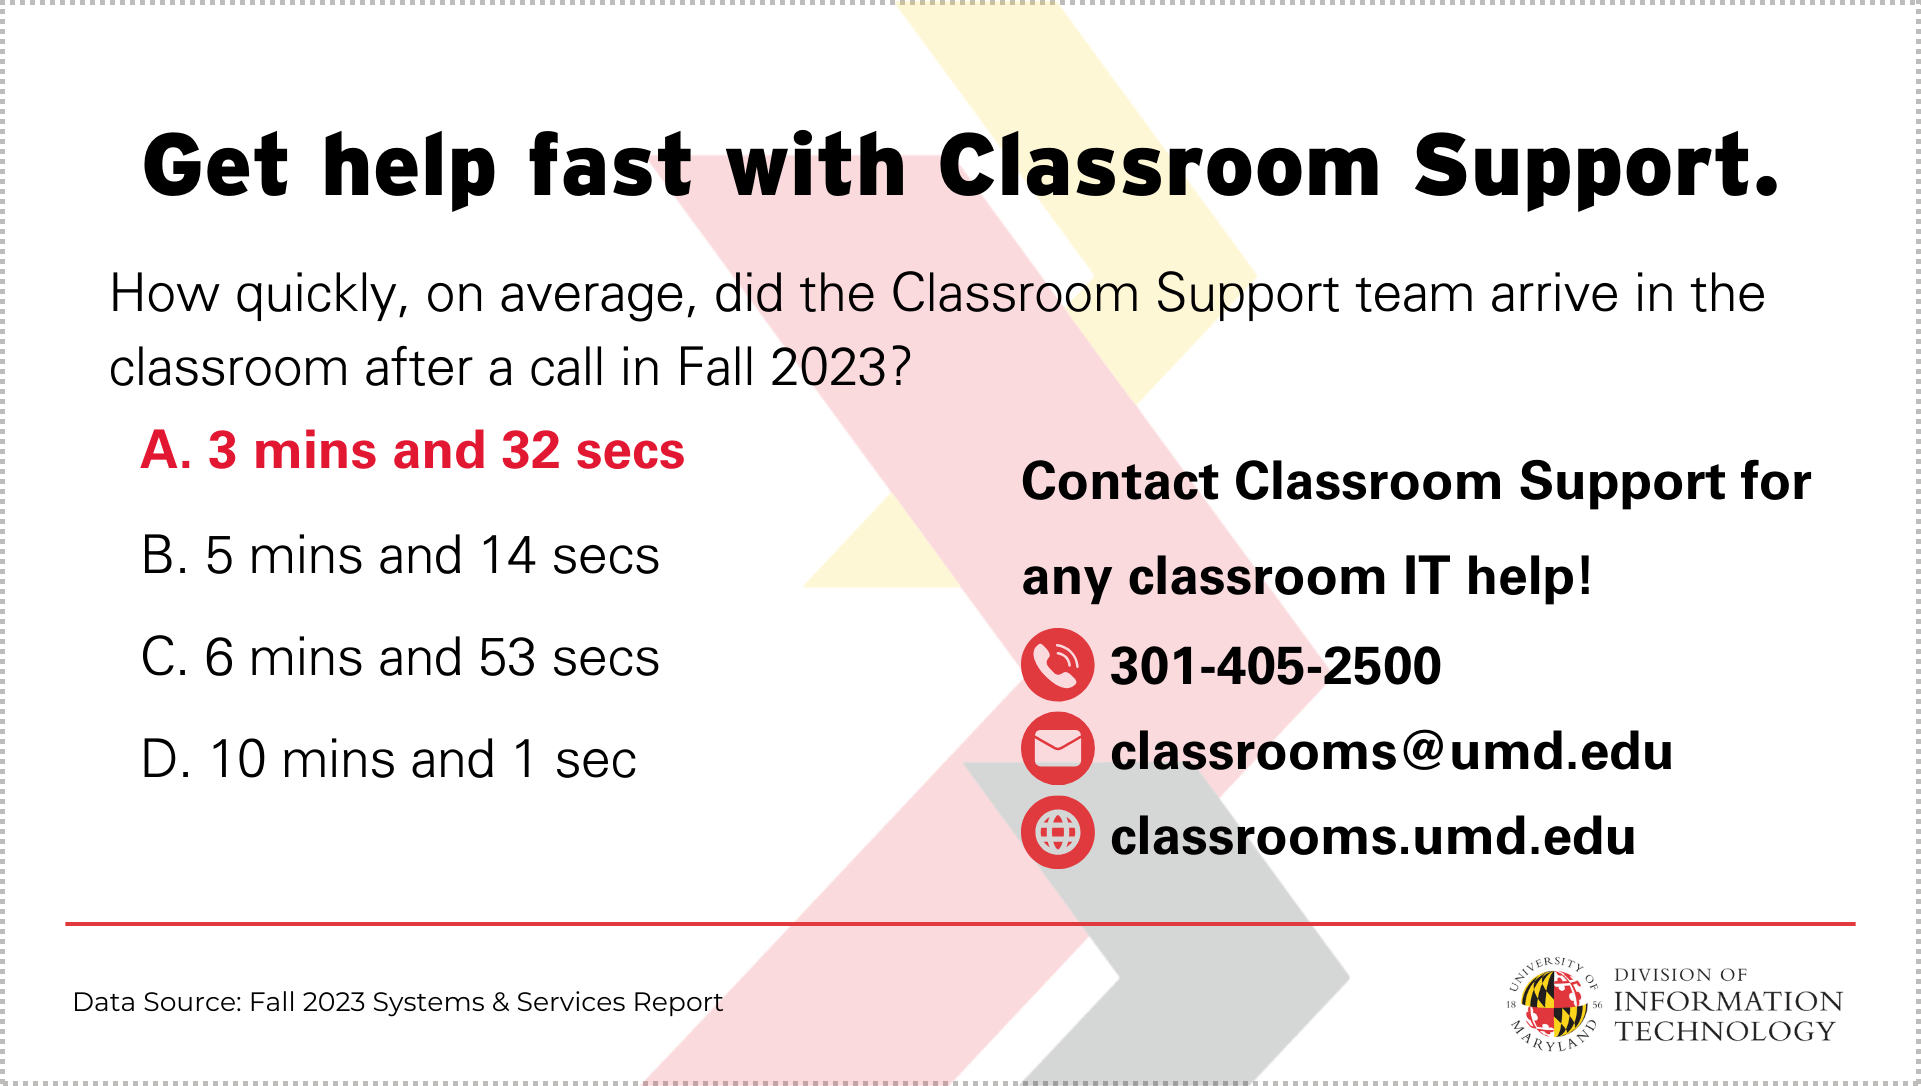 Get help fast with classroom support